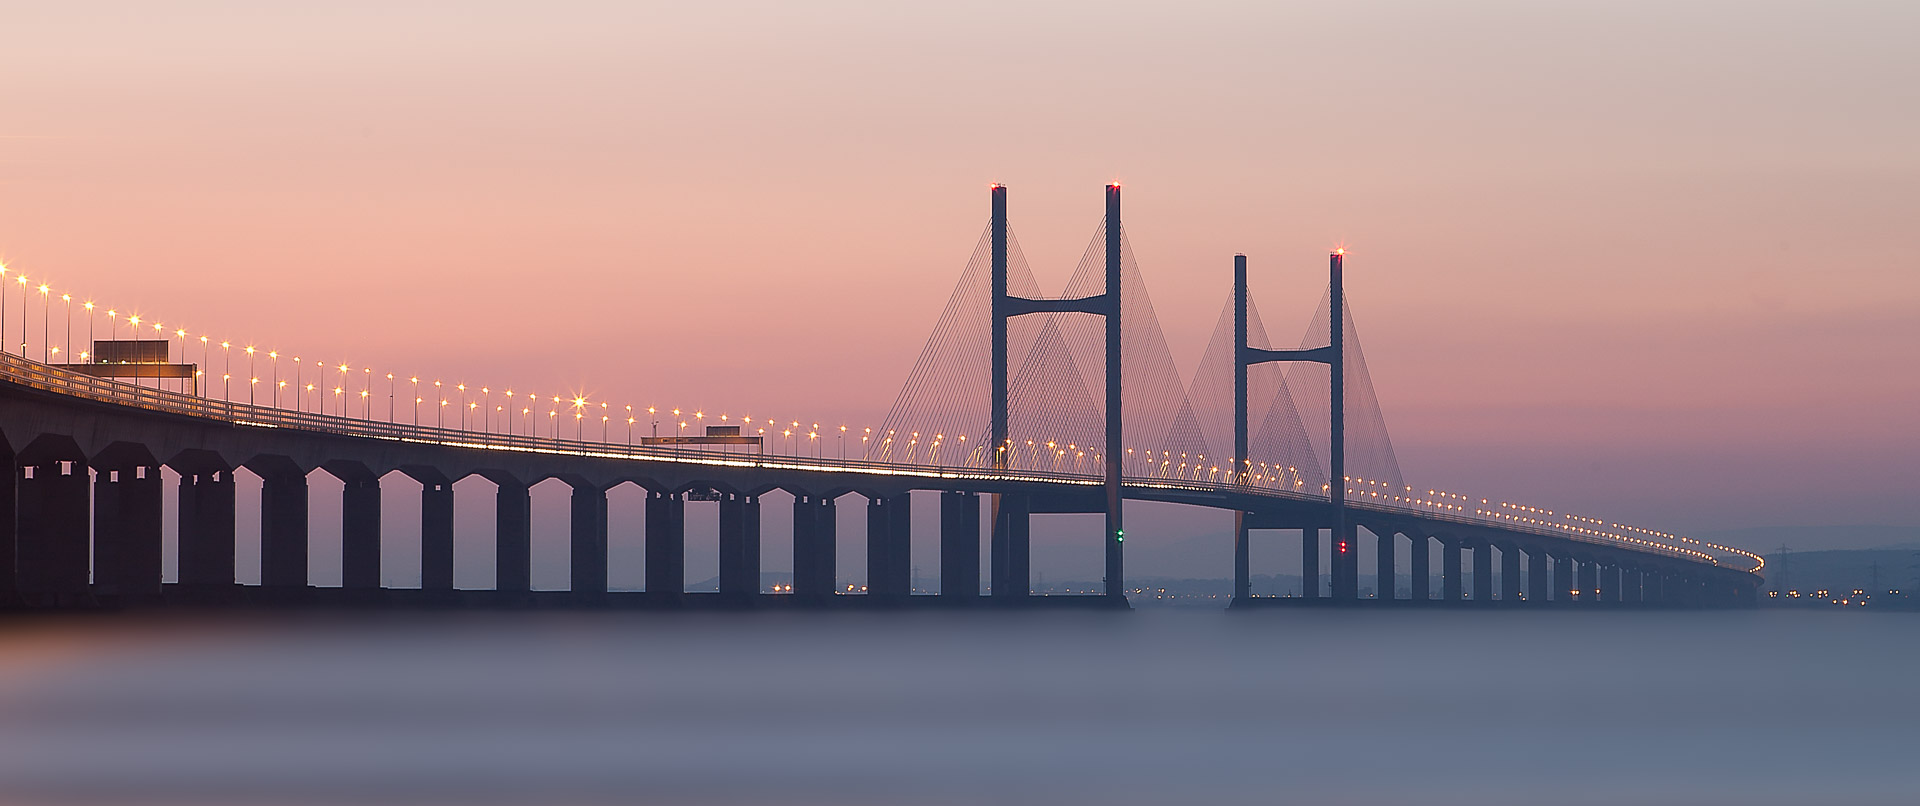 Long Exposure image of the The Second Severn Crossing, buy Richard Olpin LRPS